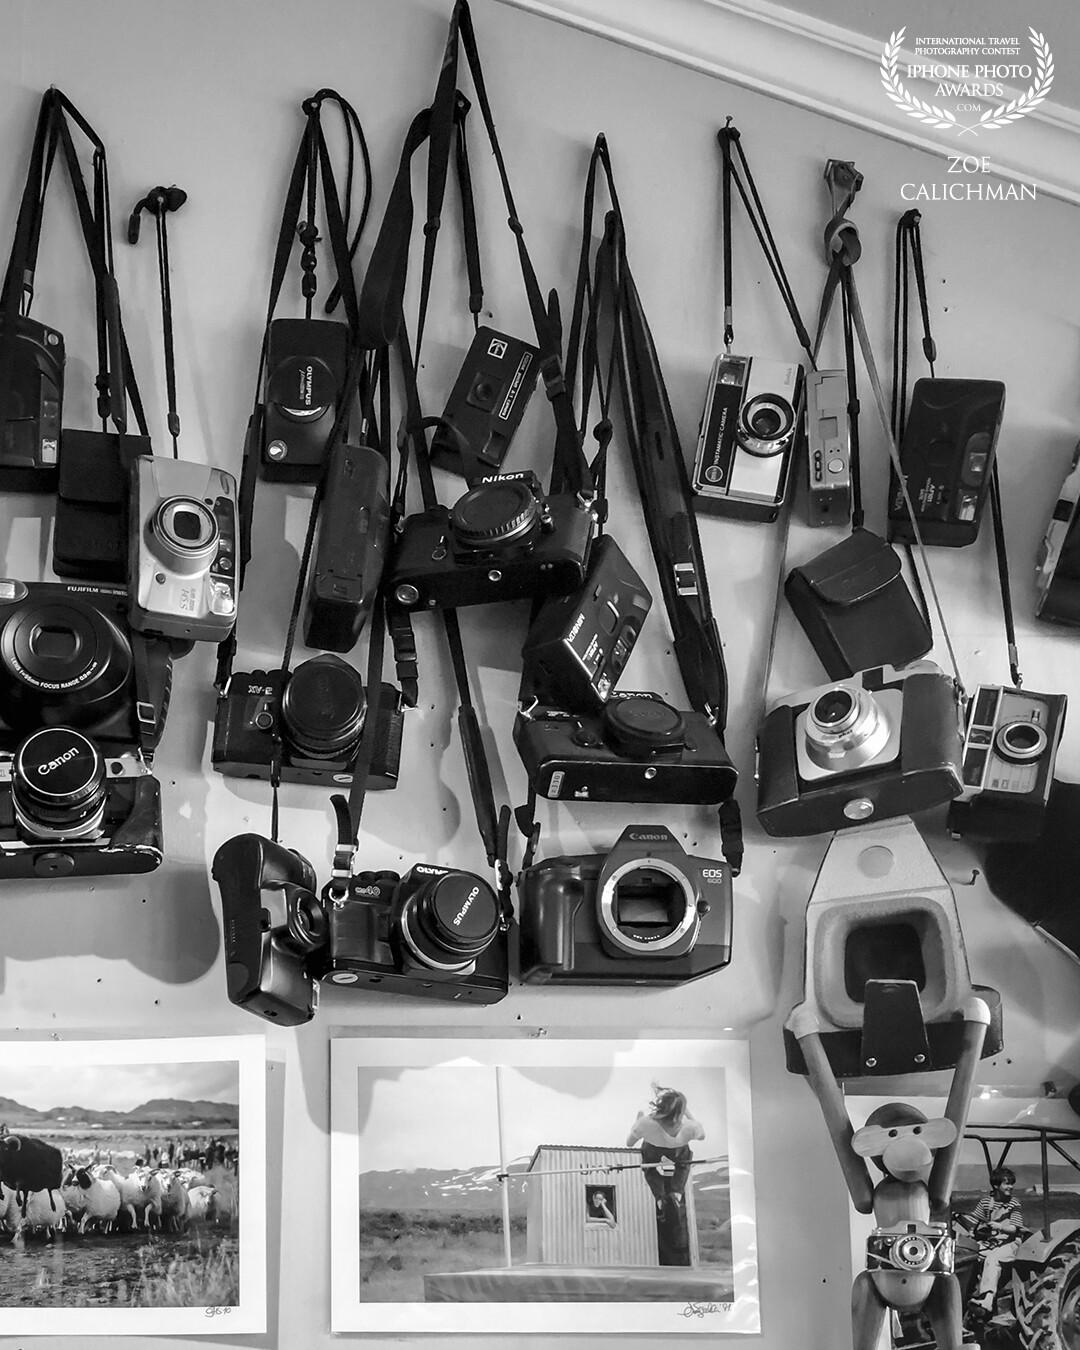 Walked into this camera shop in Reykjavik  Iceland was like going into a distant dream. Suddenly a strong nostalgic sense awoke from the pre-iPhone era.